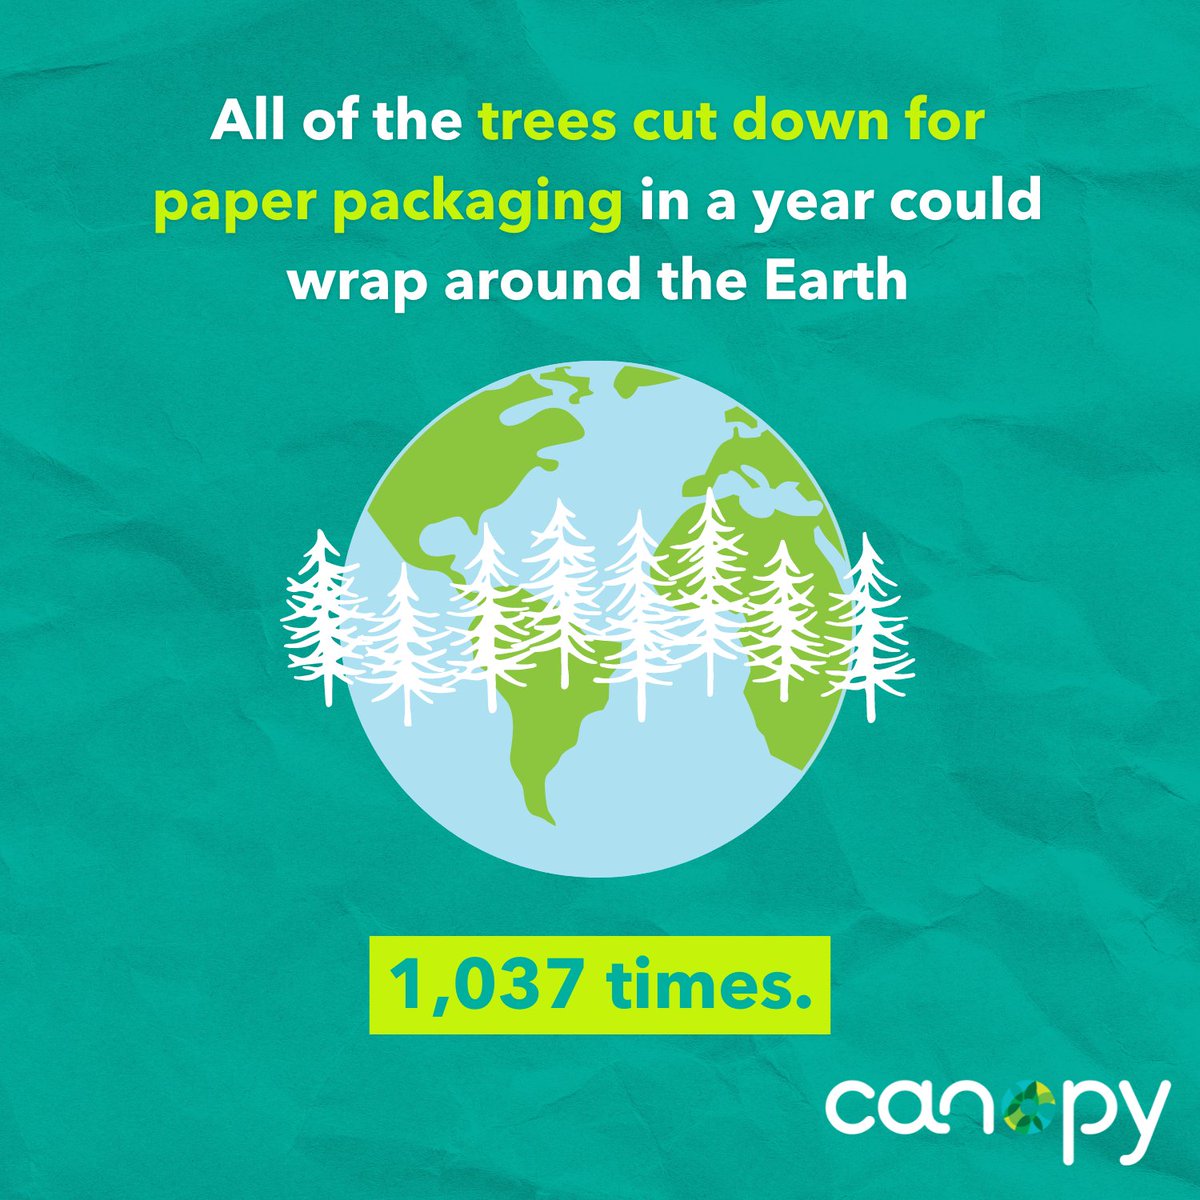 If the total amount of trees used for paper packaging each year were stacked end to end, it would wrap around the Earth 1,037 times. 😱

With Pack4Good, Canopy is implementing alternatives to paper packaging that keep vital forests standing. Not paper, not plastic, but better!